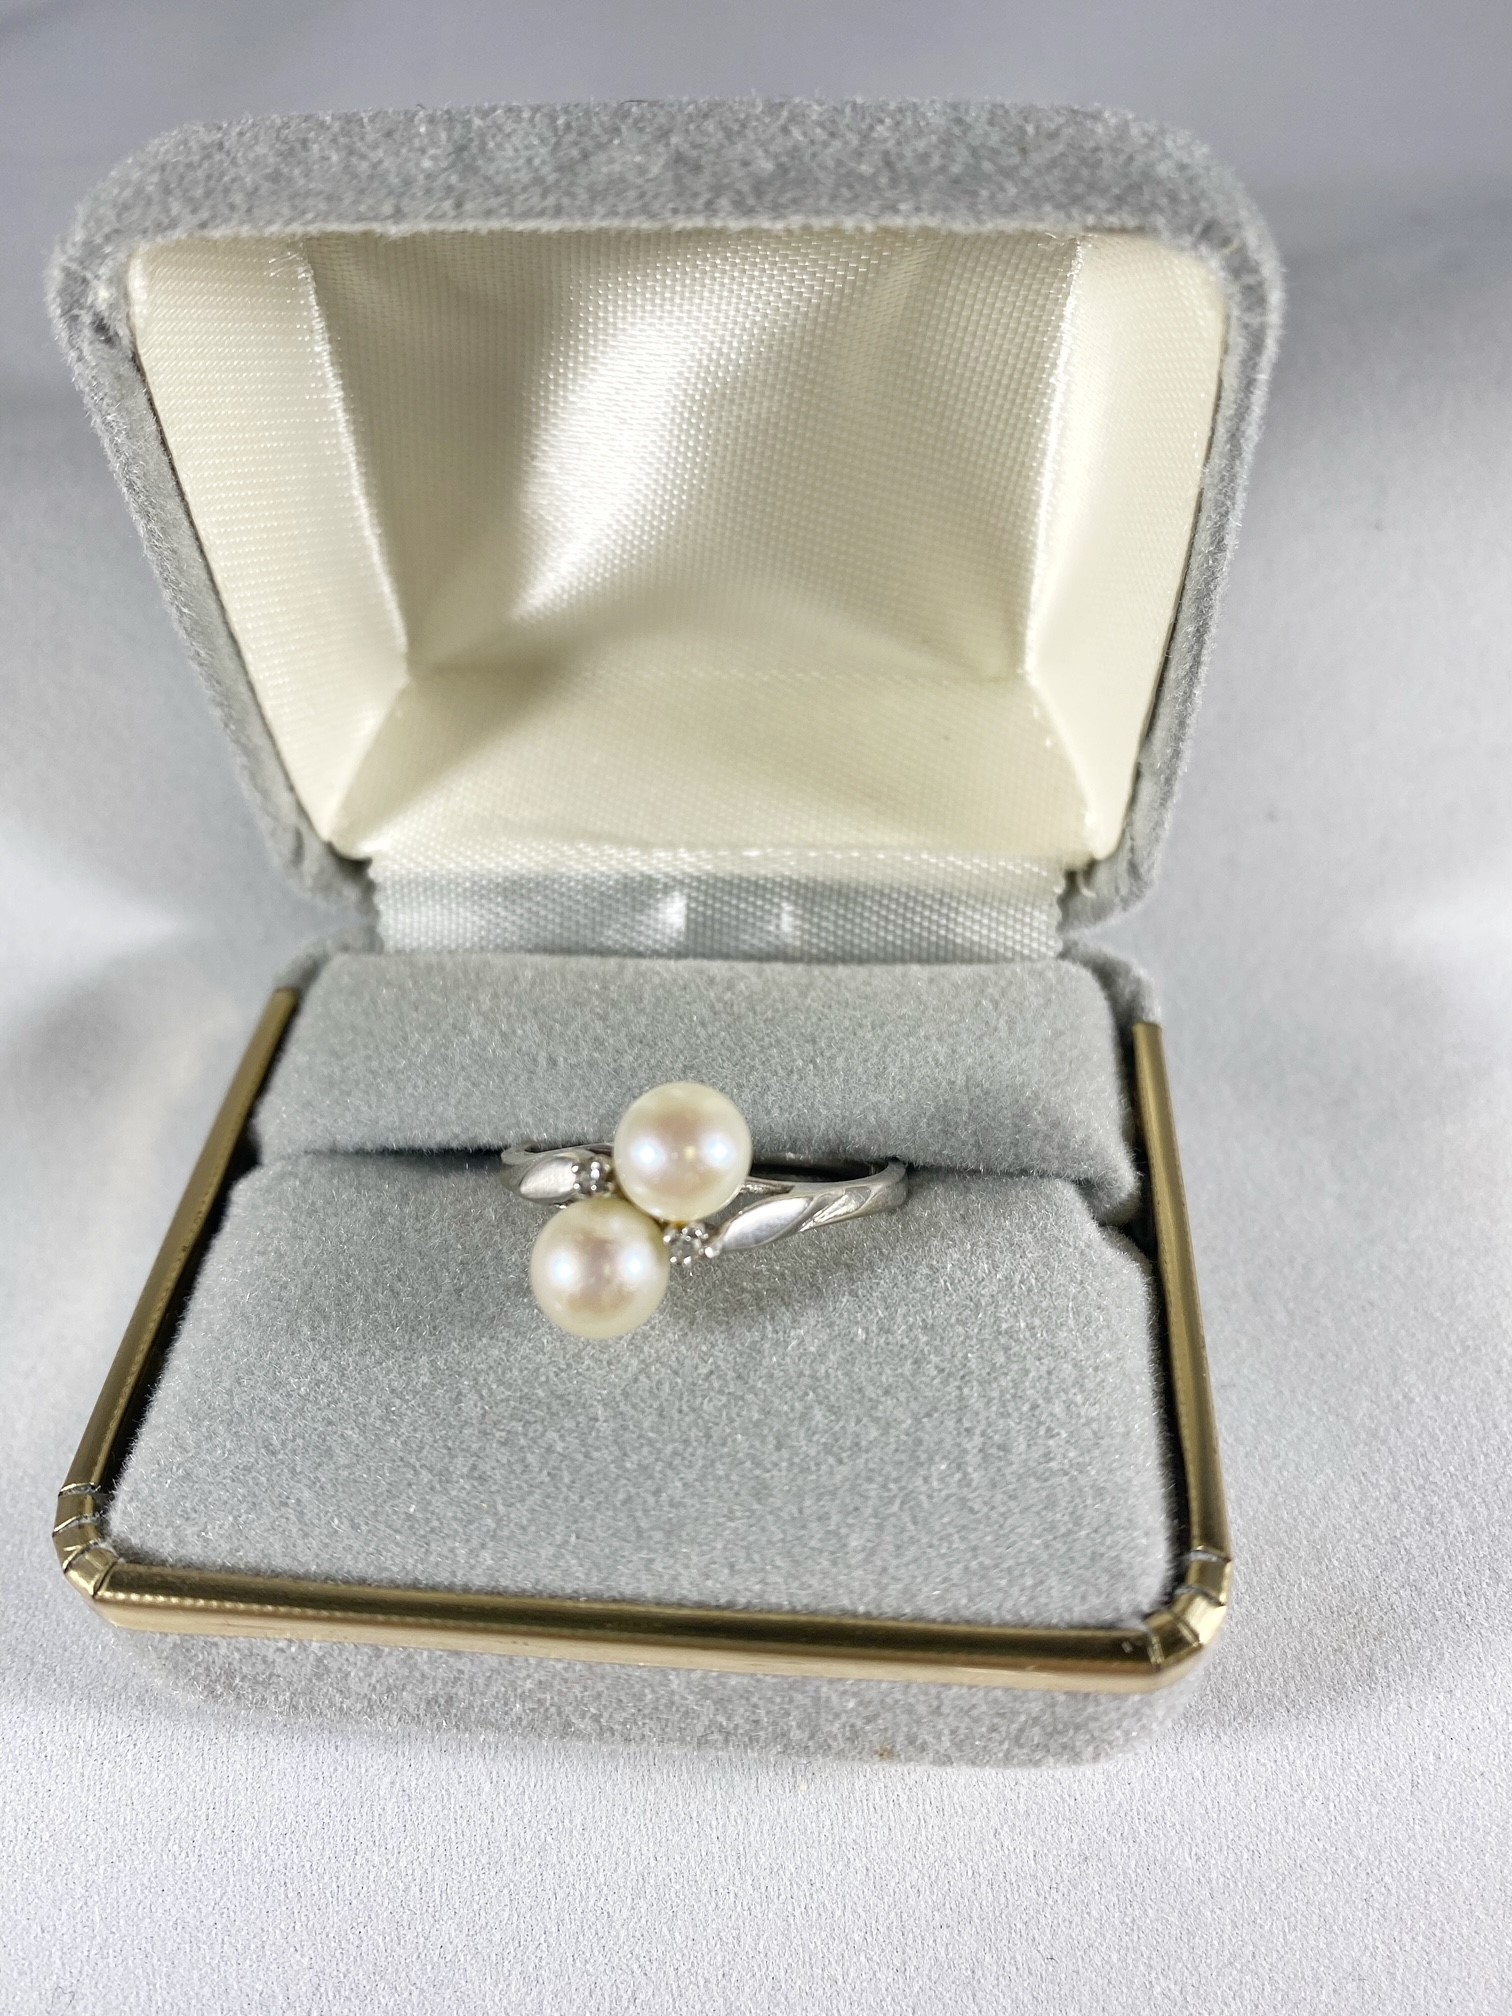 Lot 1419: 14K White Gold with Pearl-Like & Clear Stones